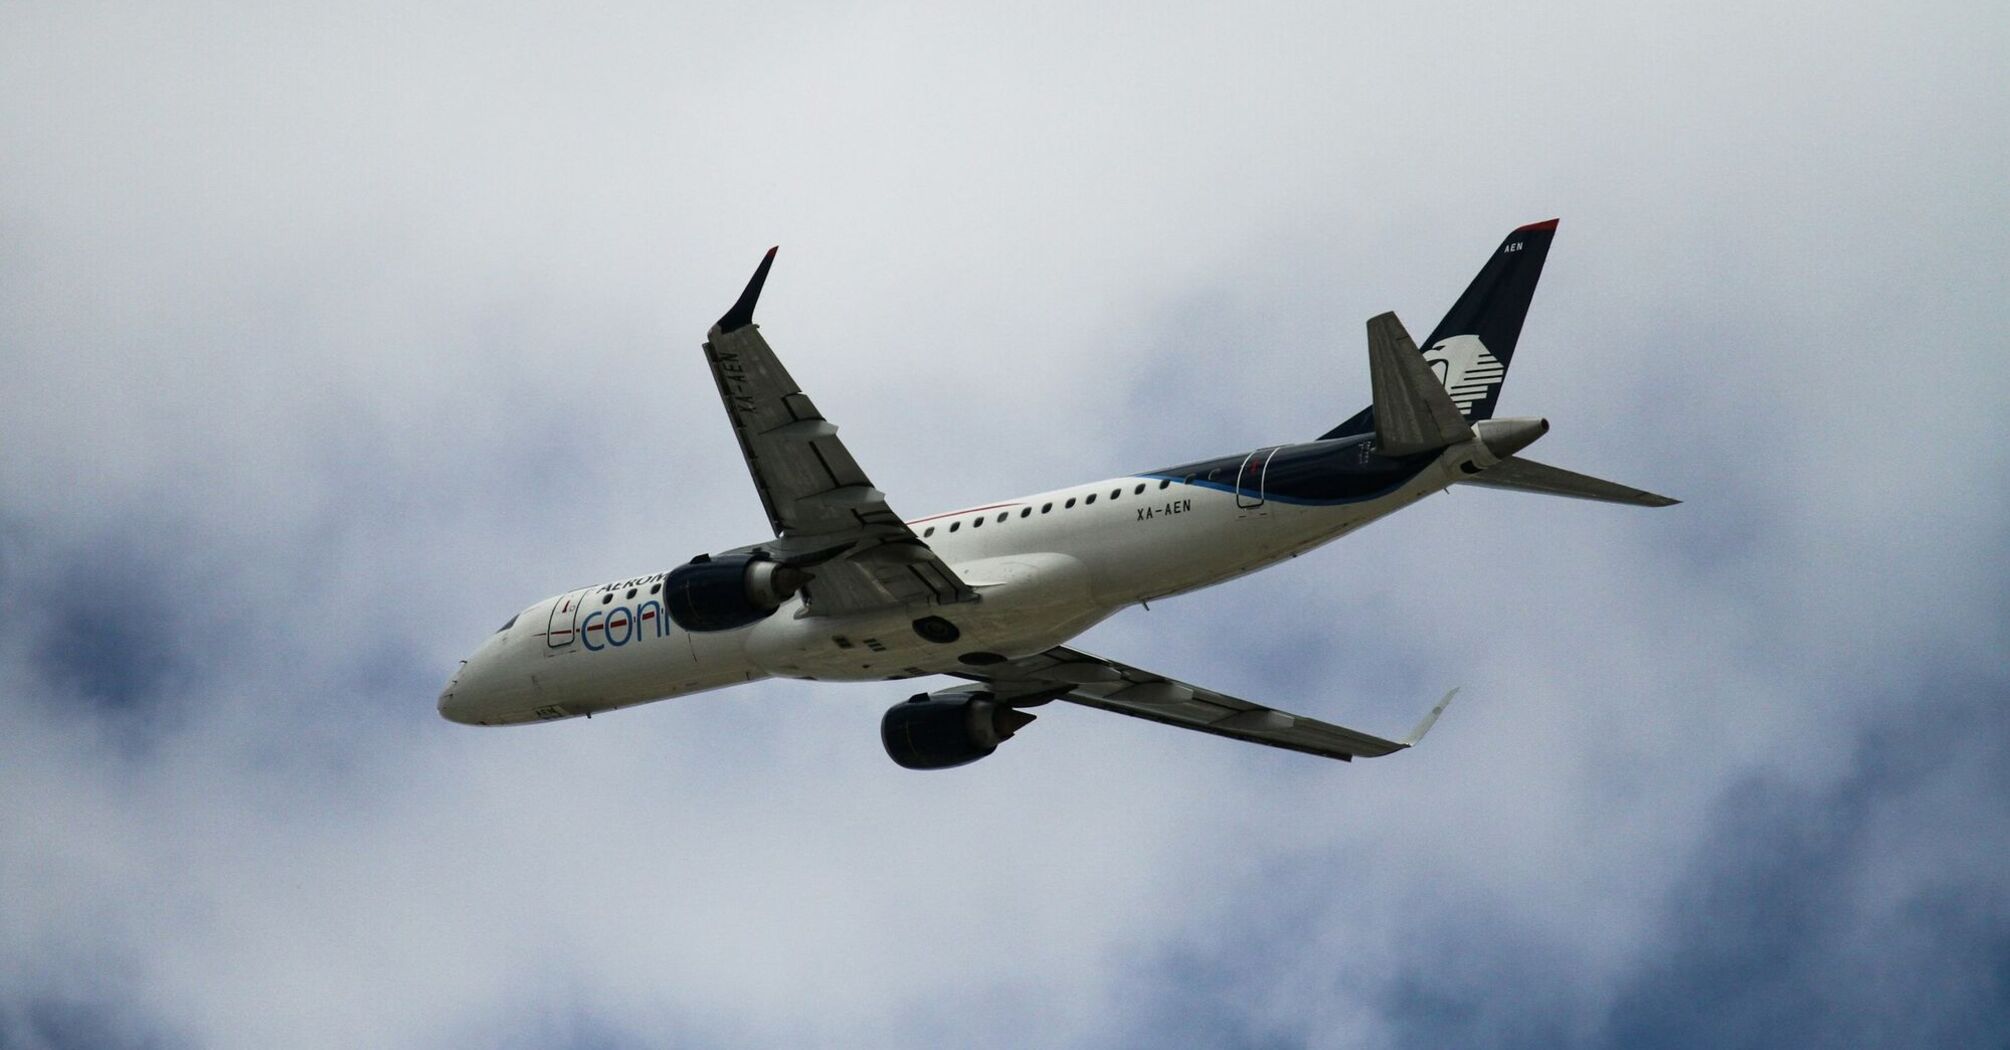 Aeromexico’s embraer 190 airplane after takeoff